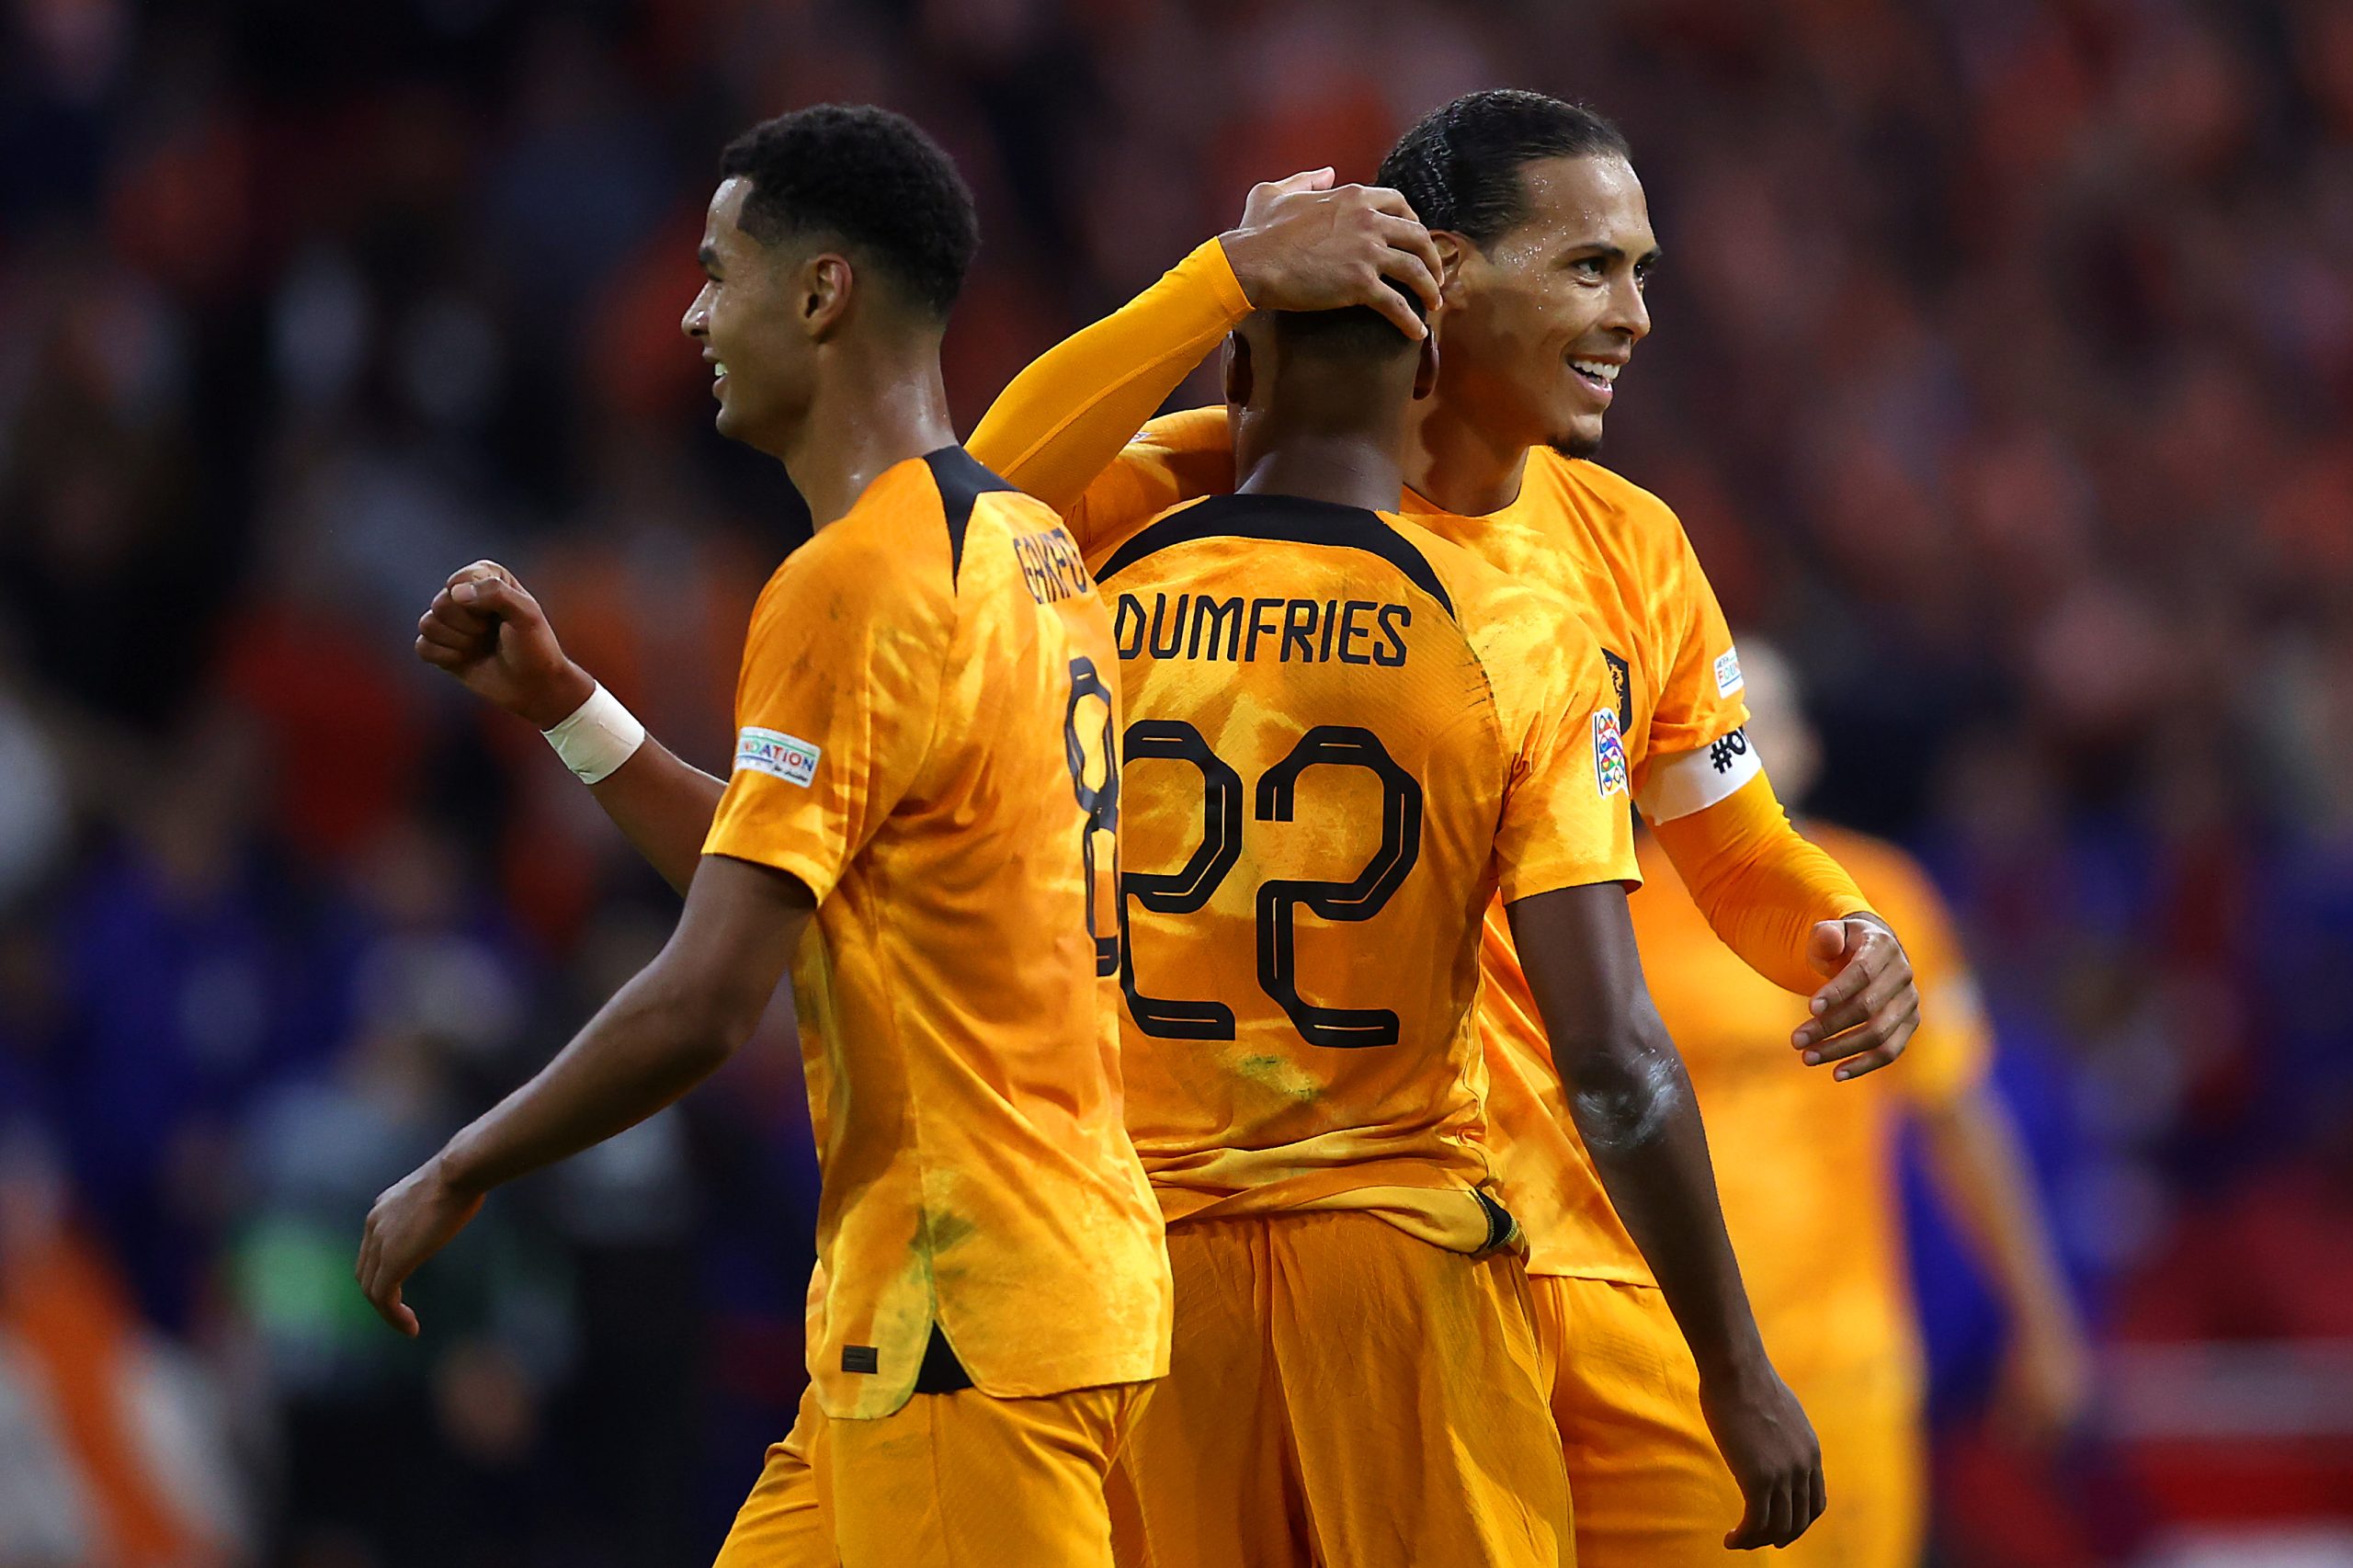 Virgil van Dijk is a Dutch superstar (Photo by Dean Mouhtaropoulos/Getty Images)